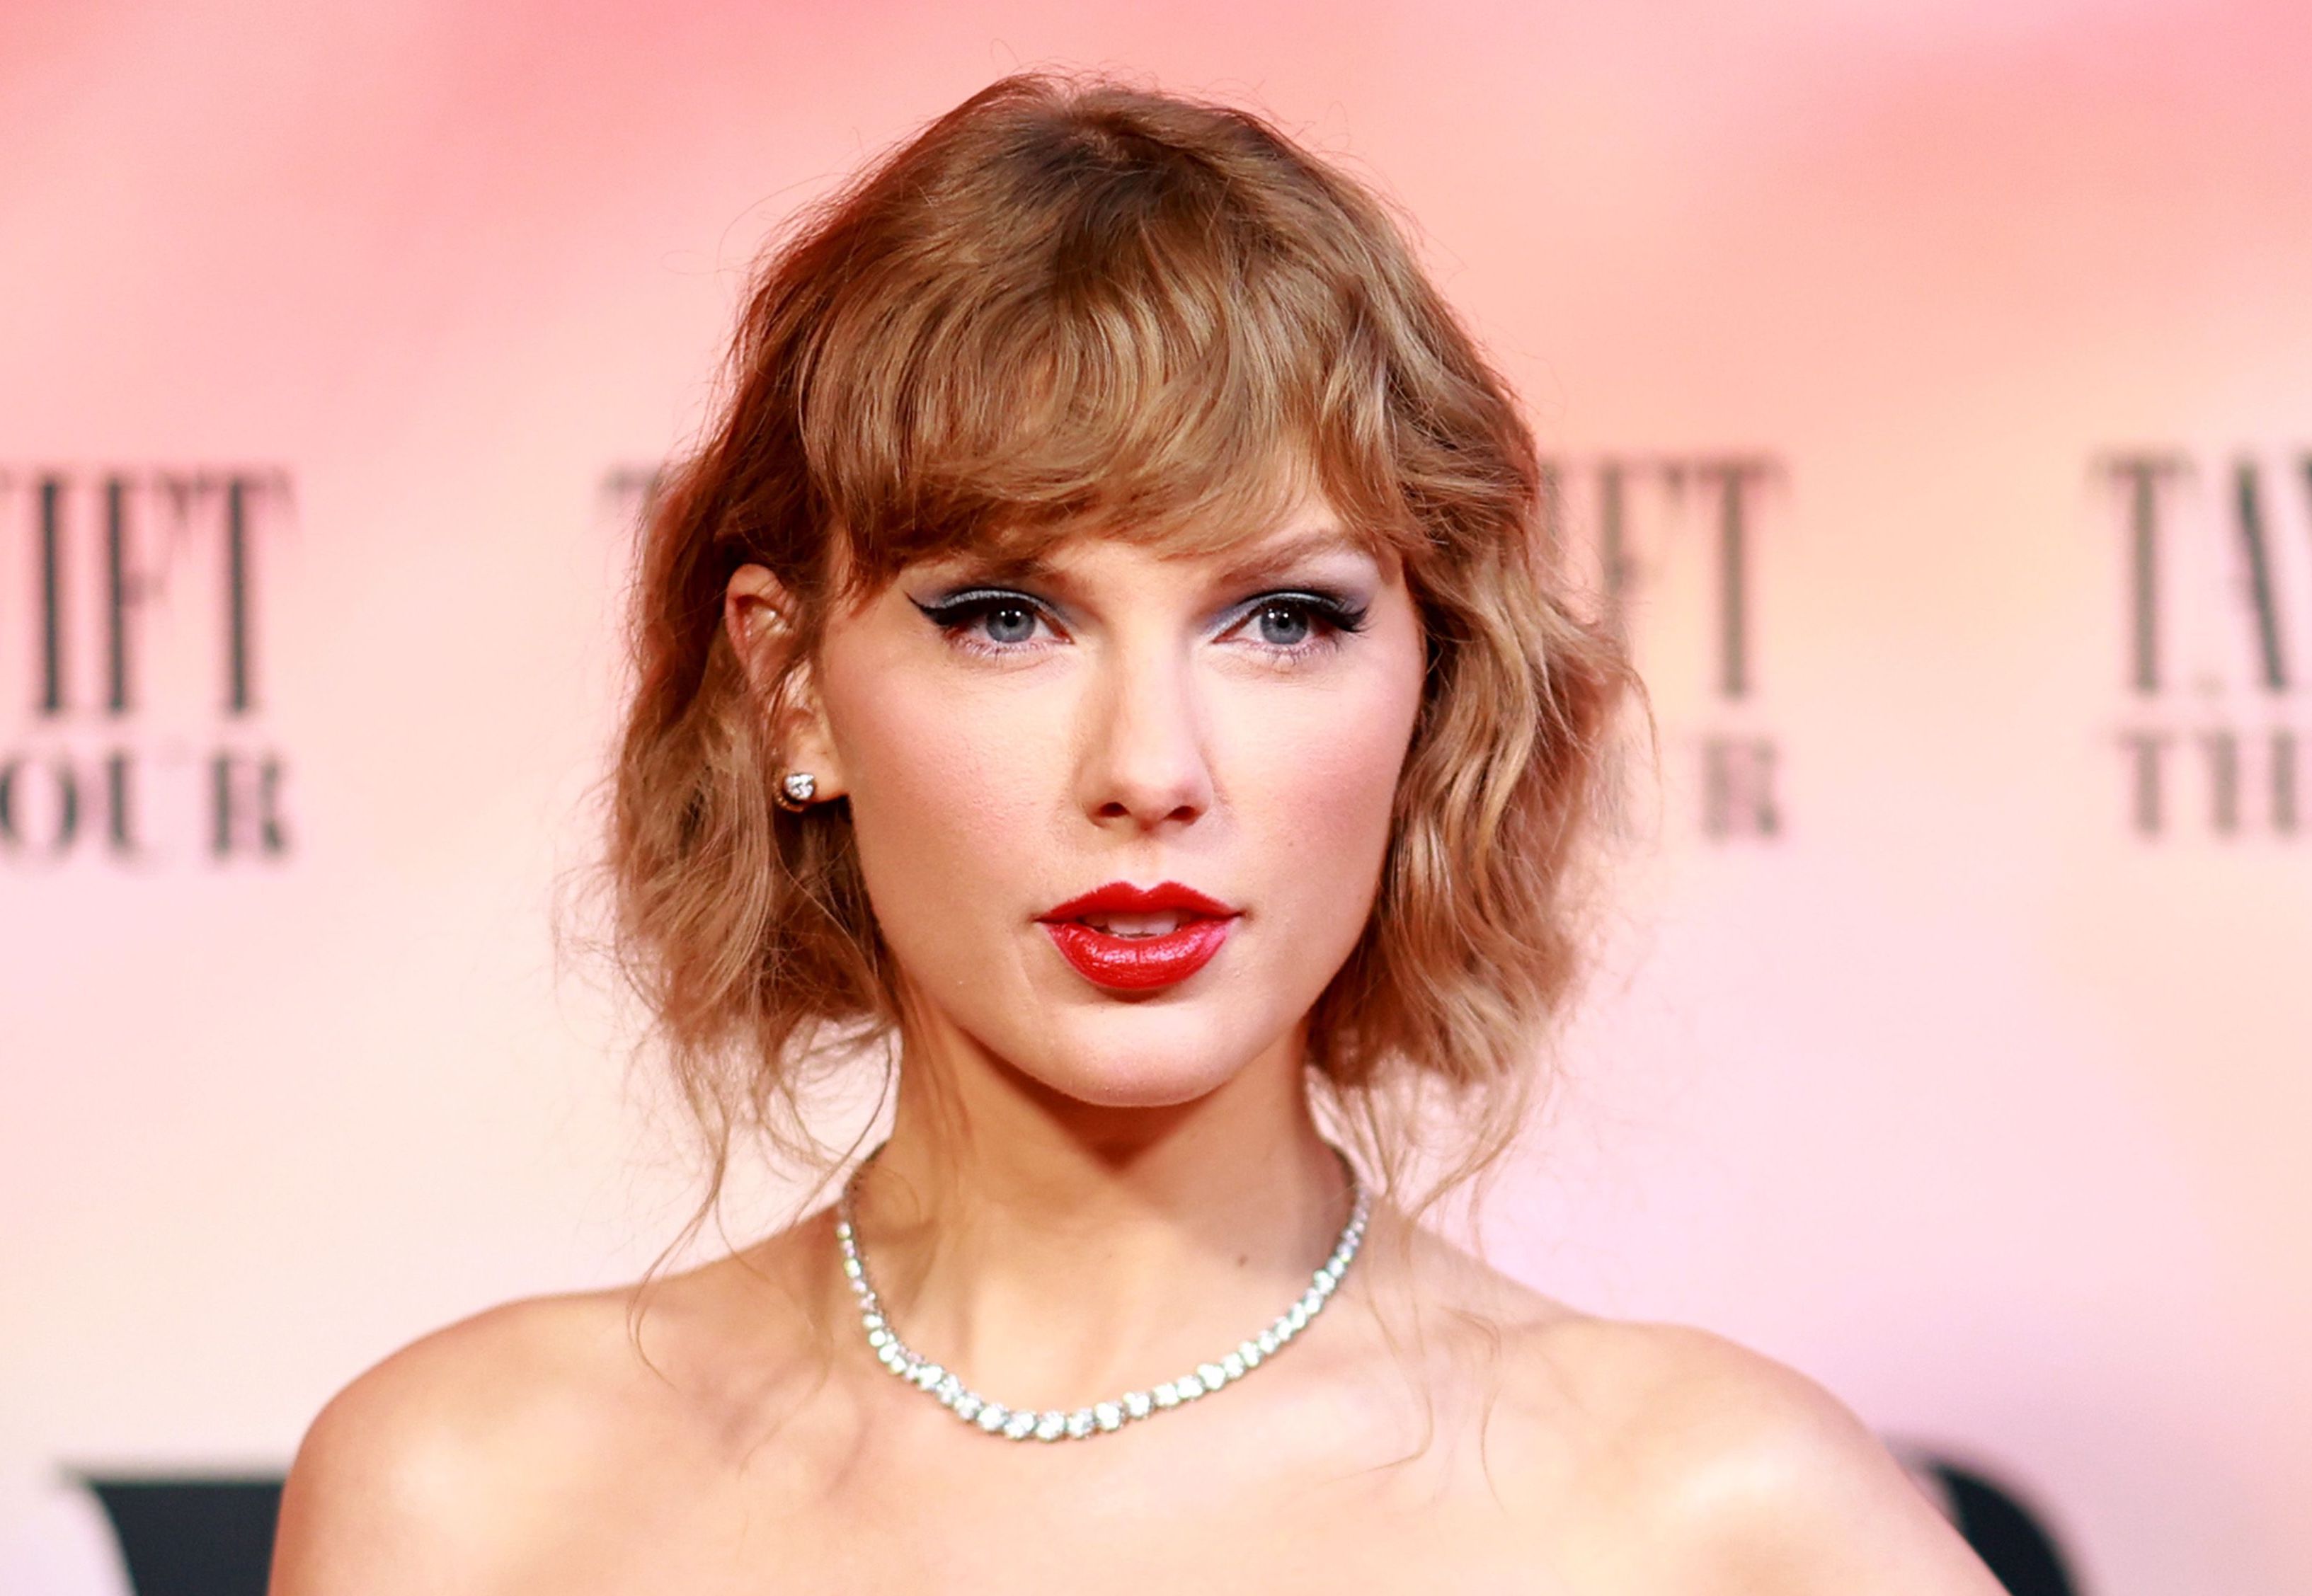 Texas lawmakers ban bots that buy concert tickets after Taylor